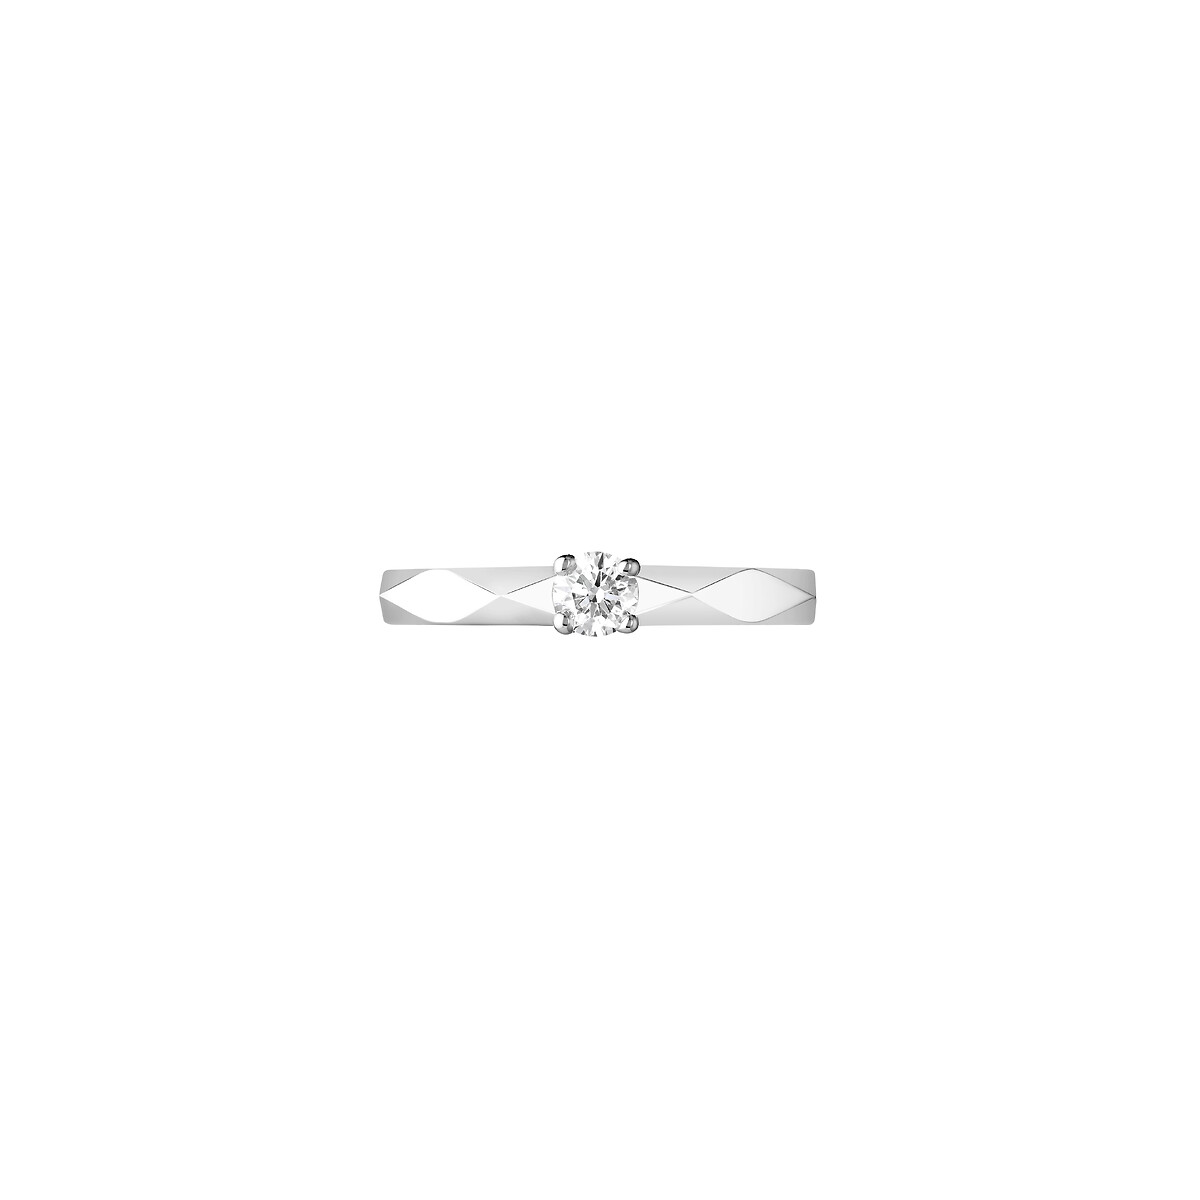 Worn look Facette Engagement ring